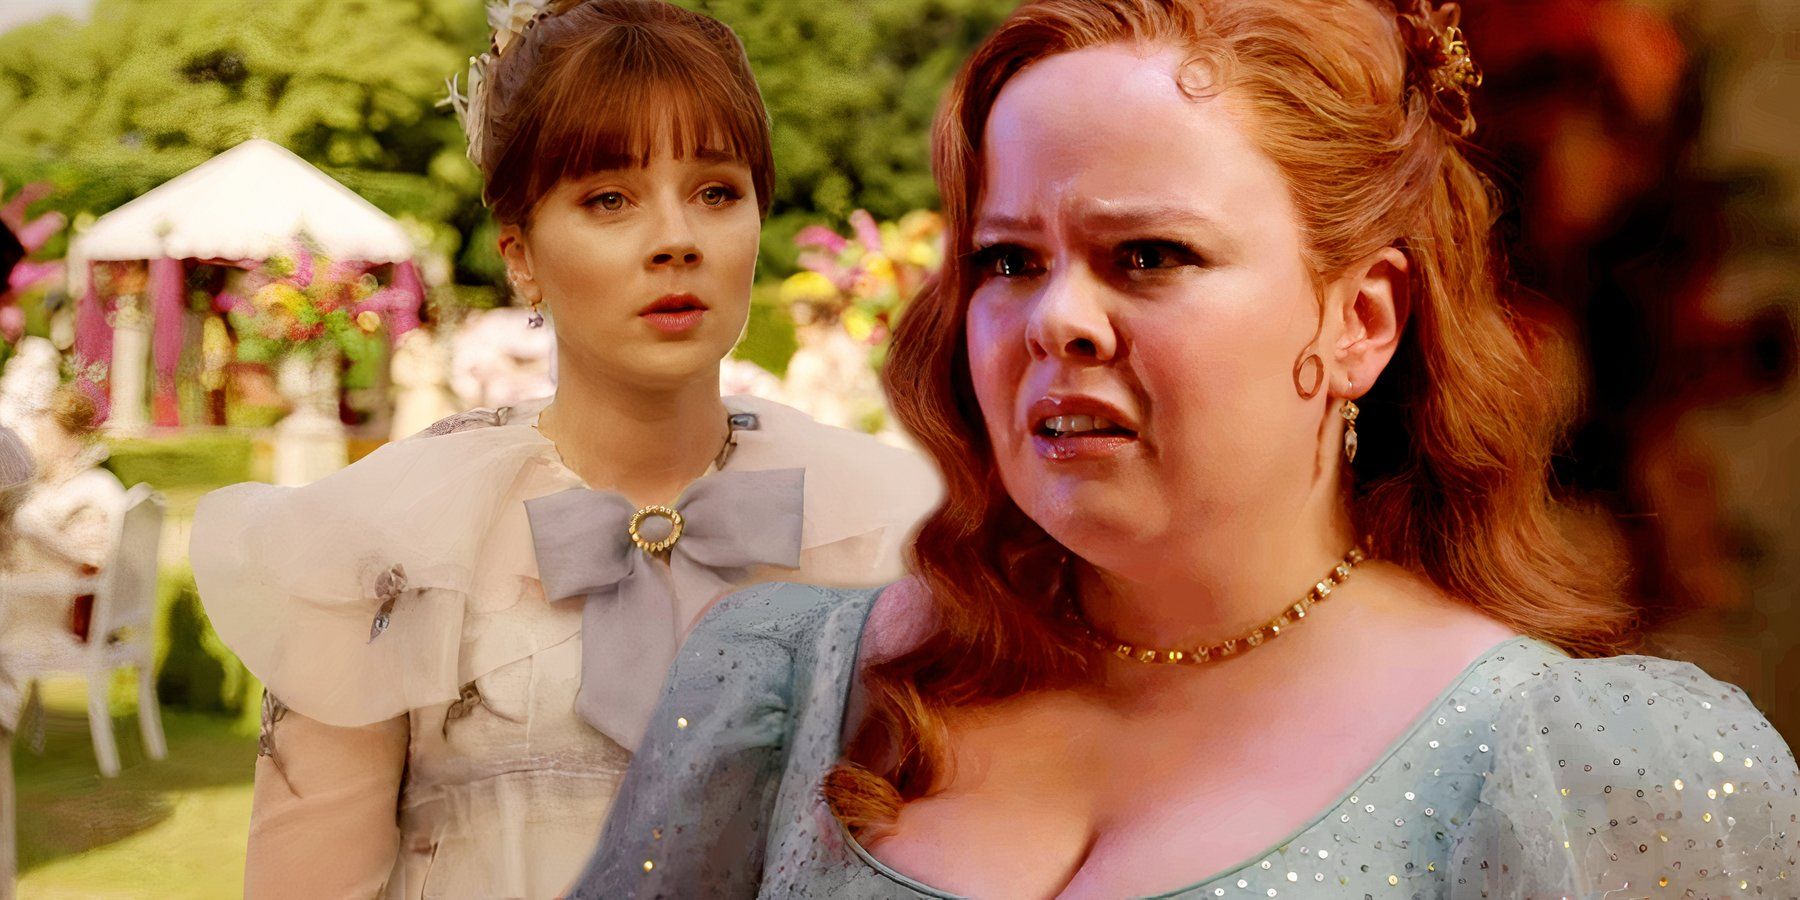 Eloise & Penelope’s Bridgerton Season 3, Part 2 Clash & Any Chance Of Reconciliation Teased By Showrunner